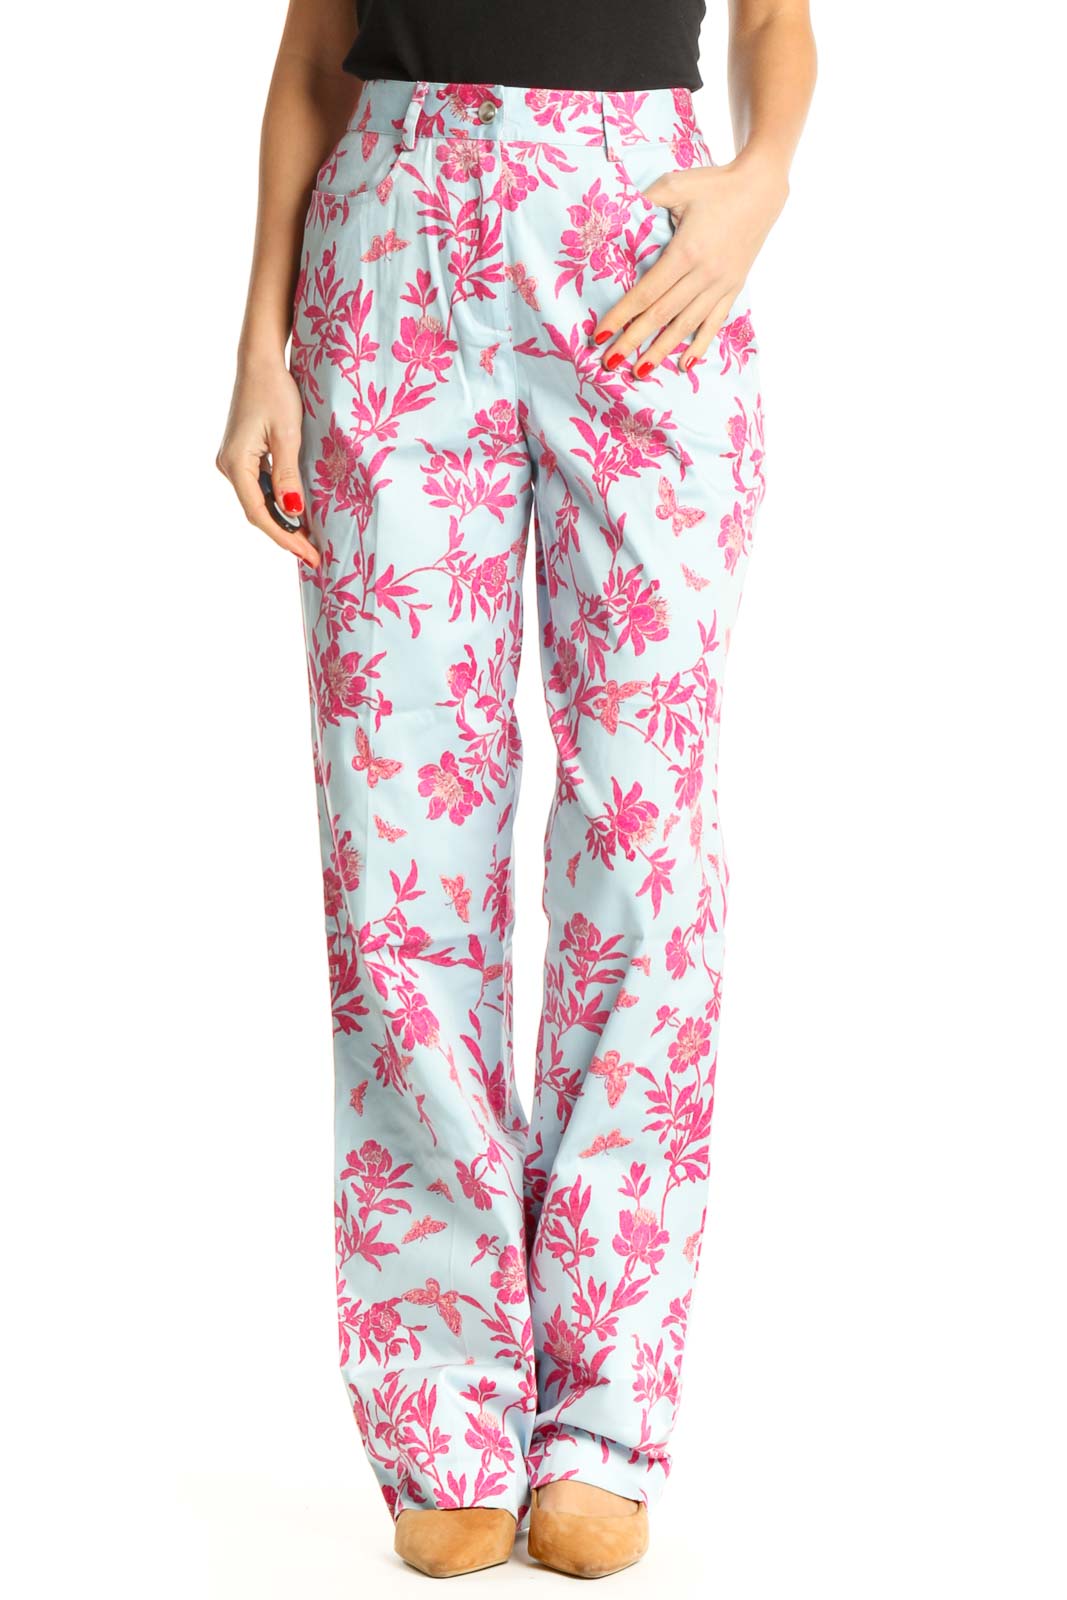 Blue Floral Print Casual Trousers Front